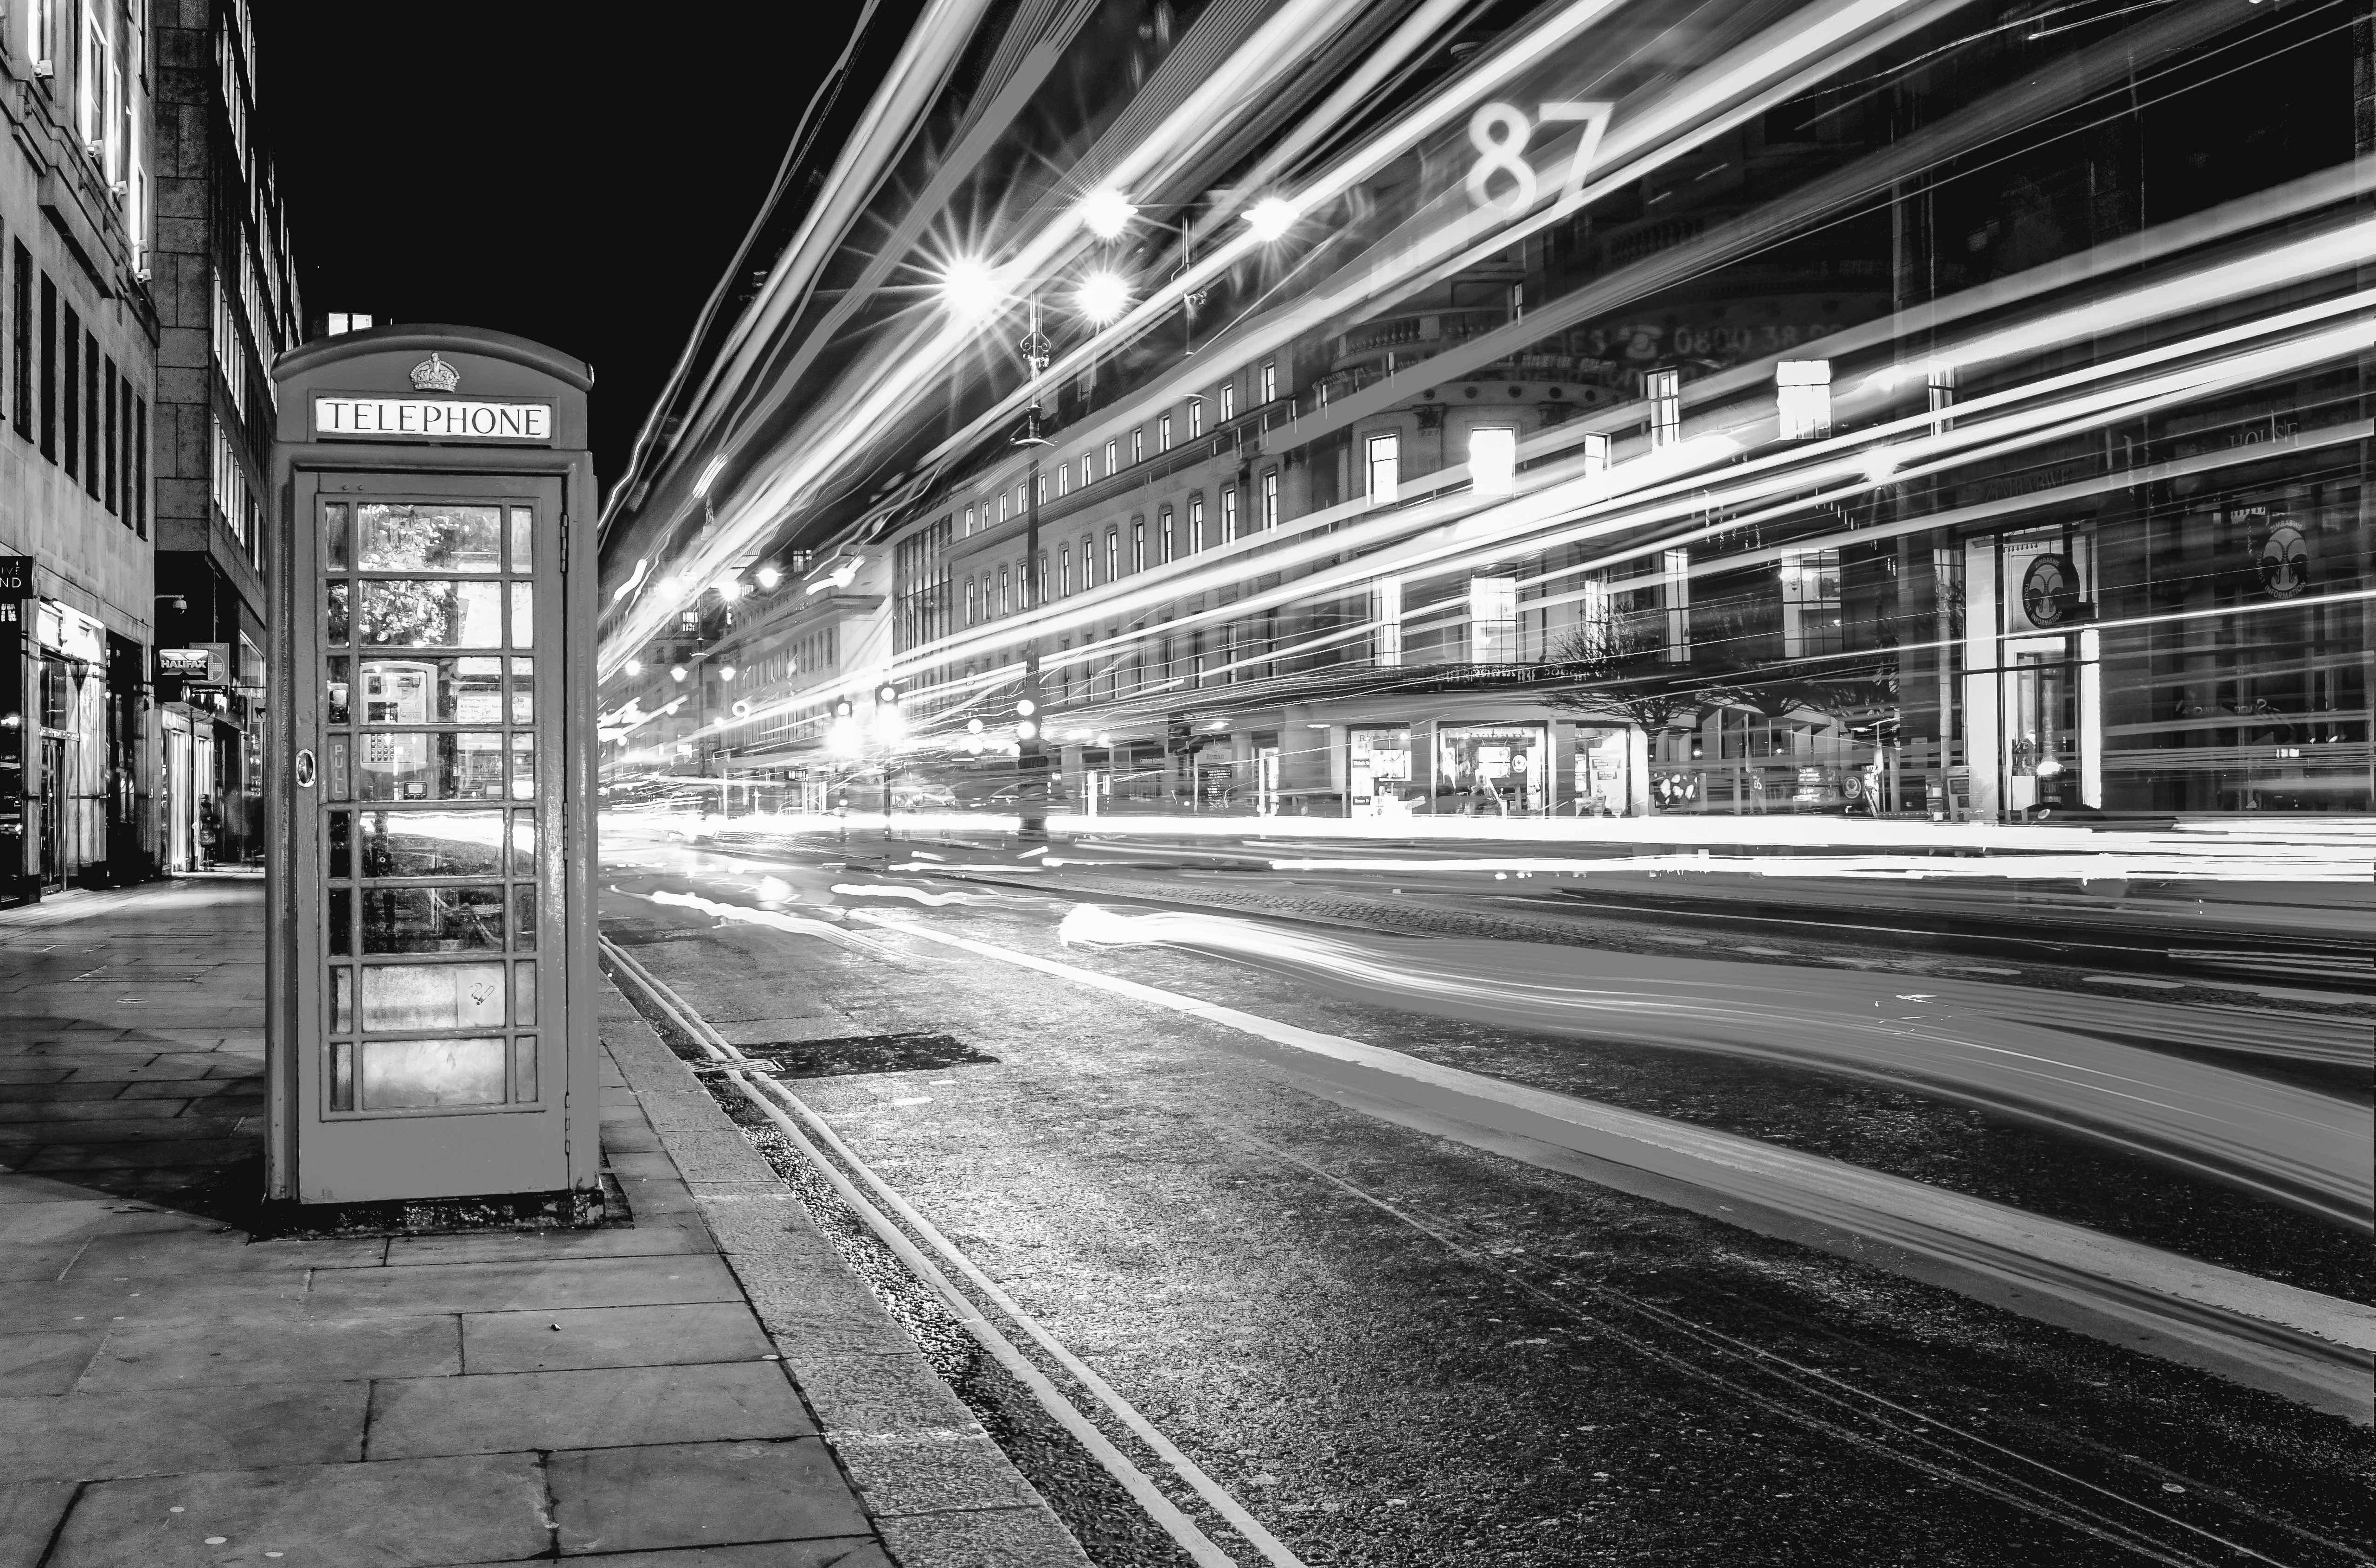 London street with phone box and bright lights